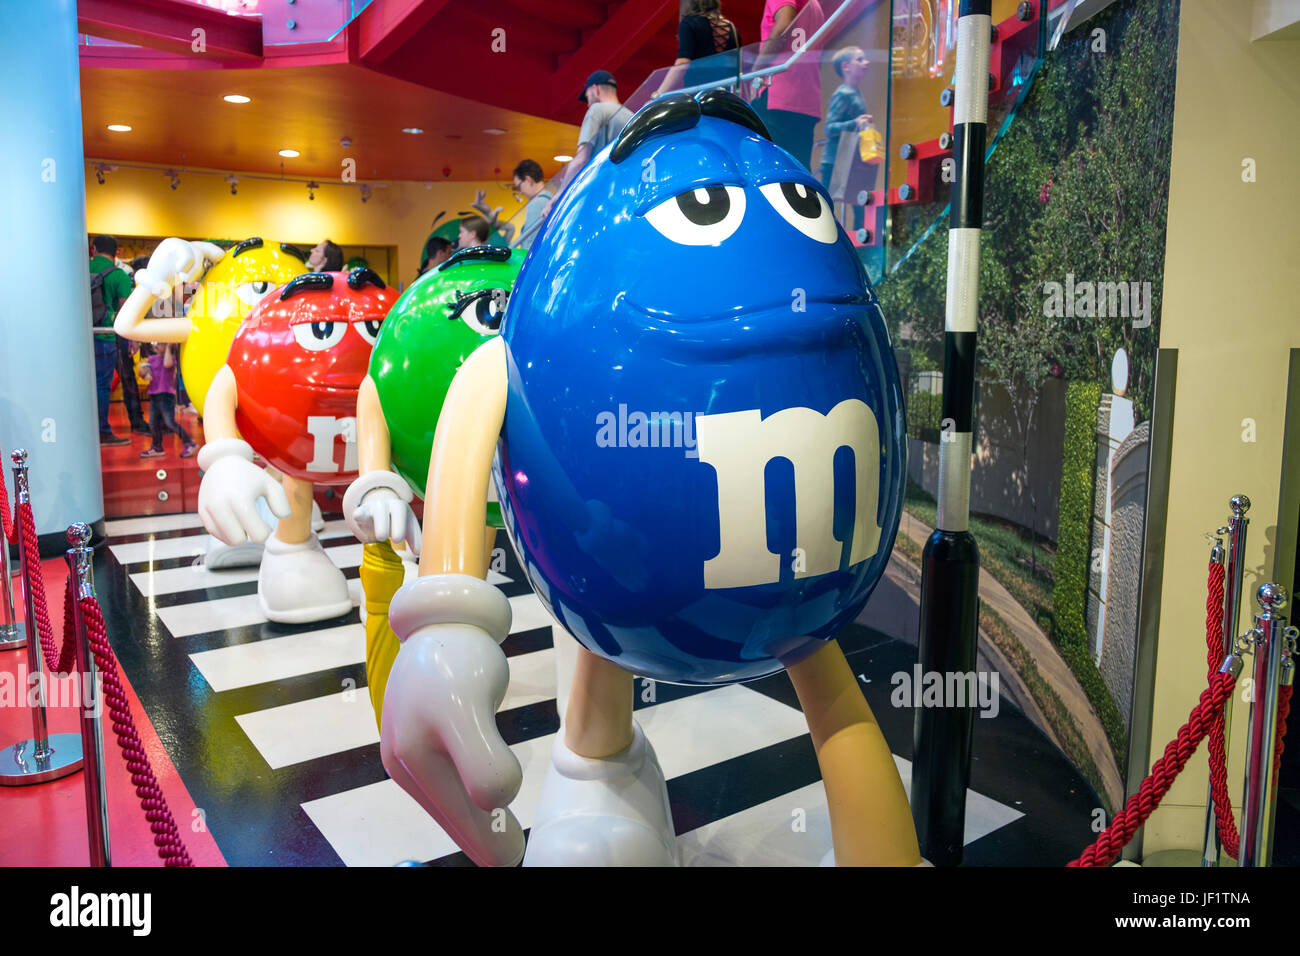 M & M Hommage an Beatles-Abbey Road crossing, M & M Welt am Leicester Square, London, UK Stockfoto